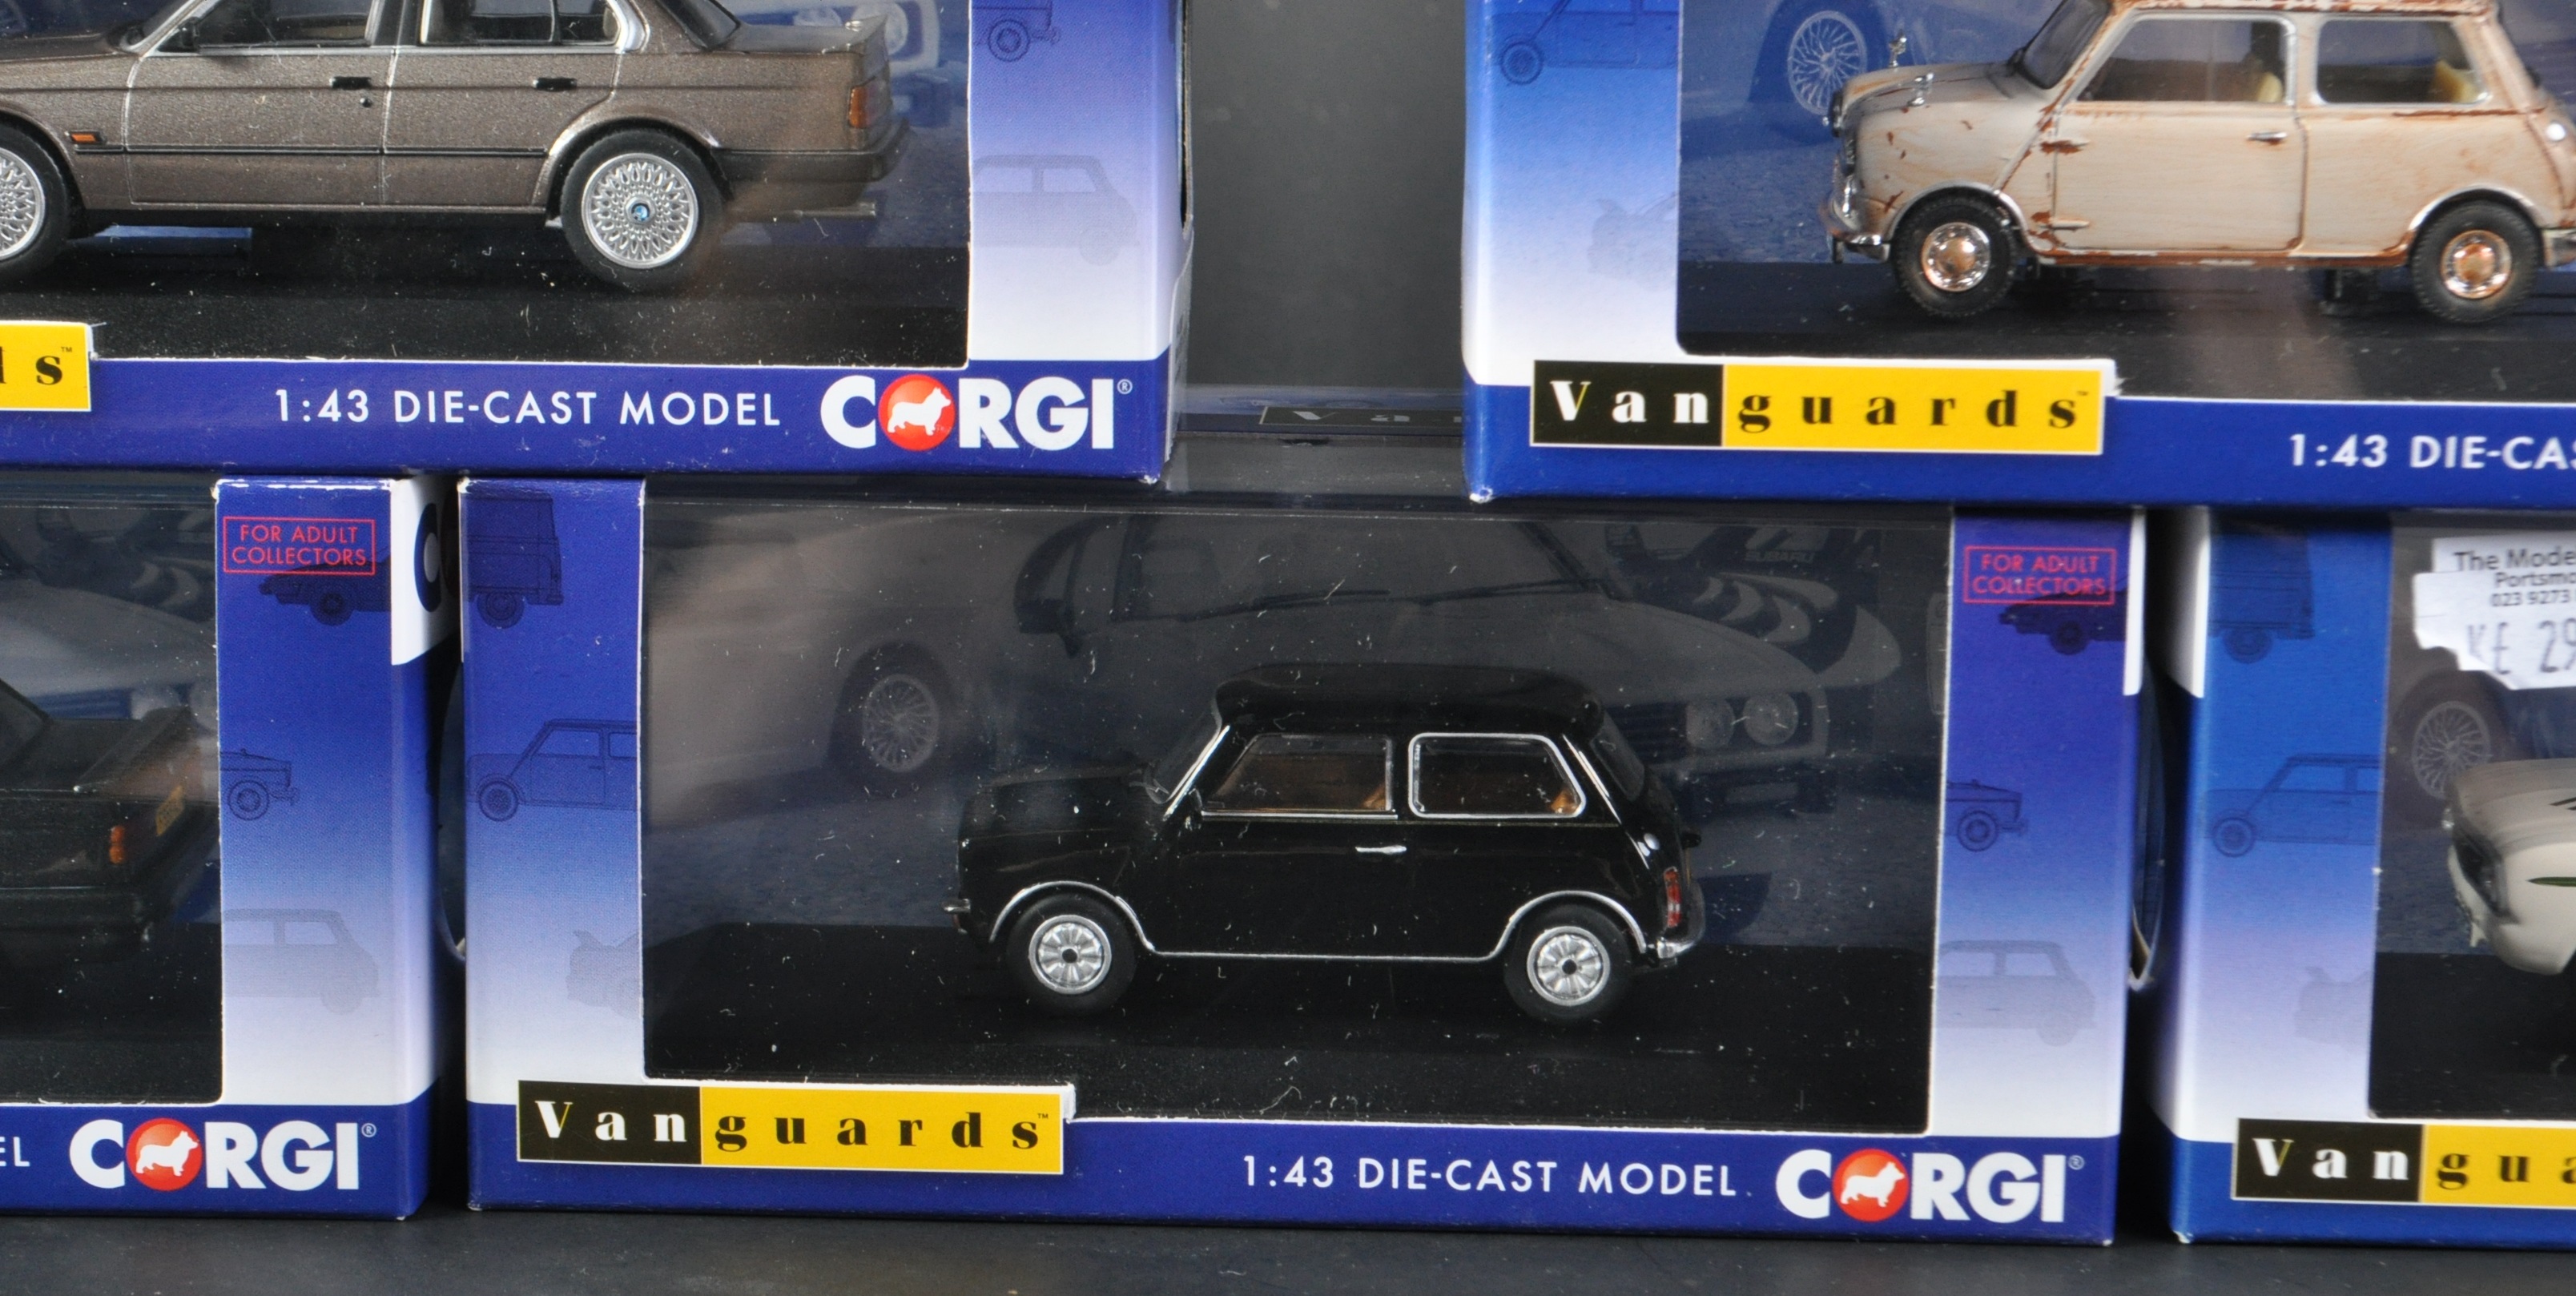 COLLECTION OF CORGI VANGUARDS 1/43 SCALE DIECAST MODEL CARS - Image 6 of 6